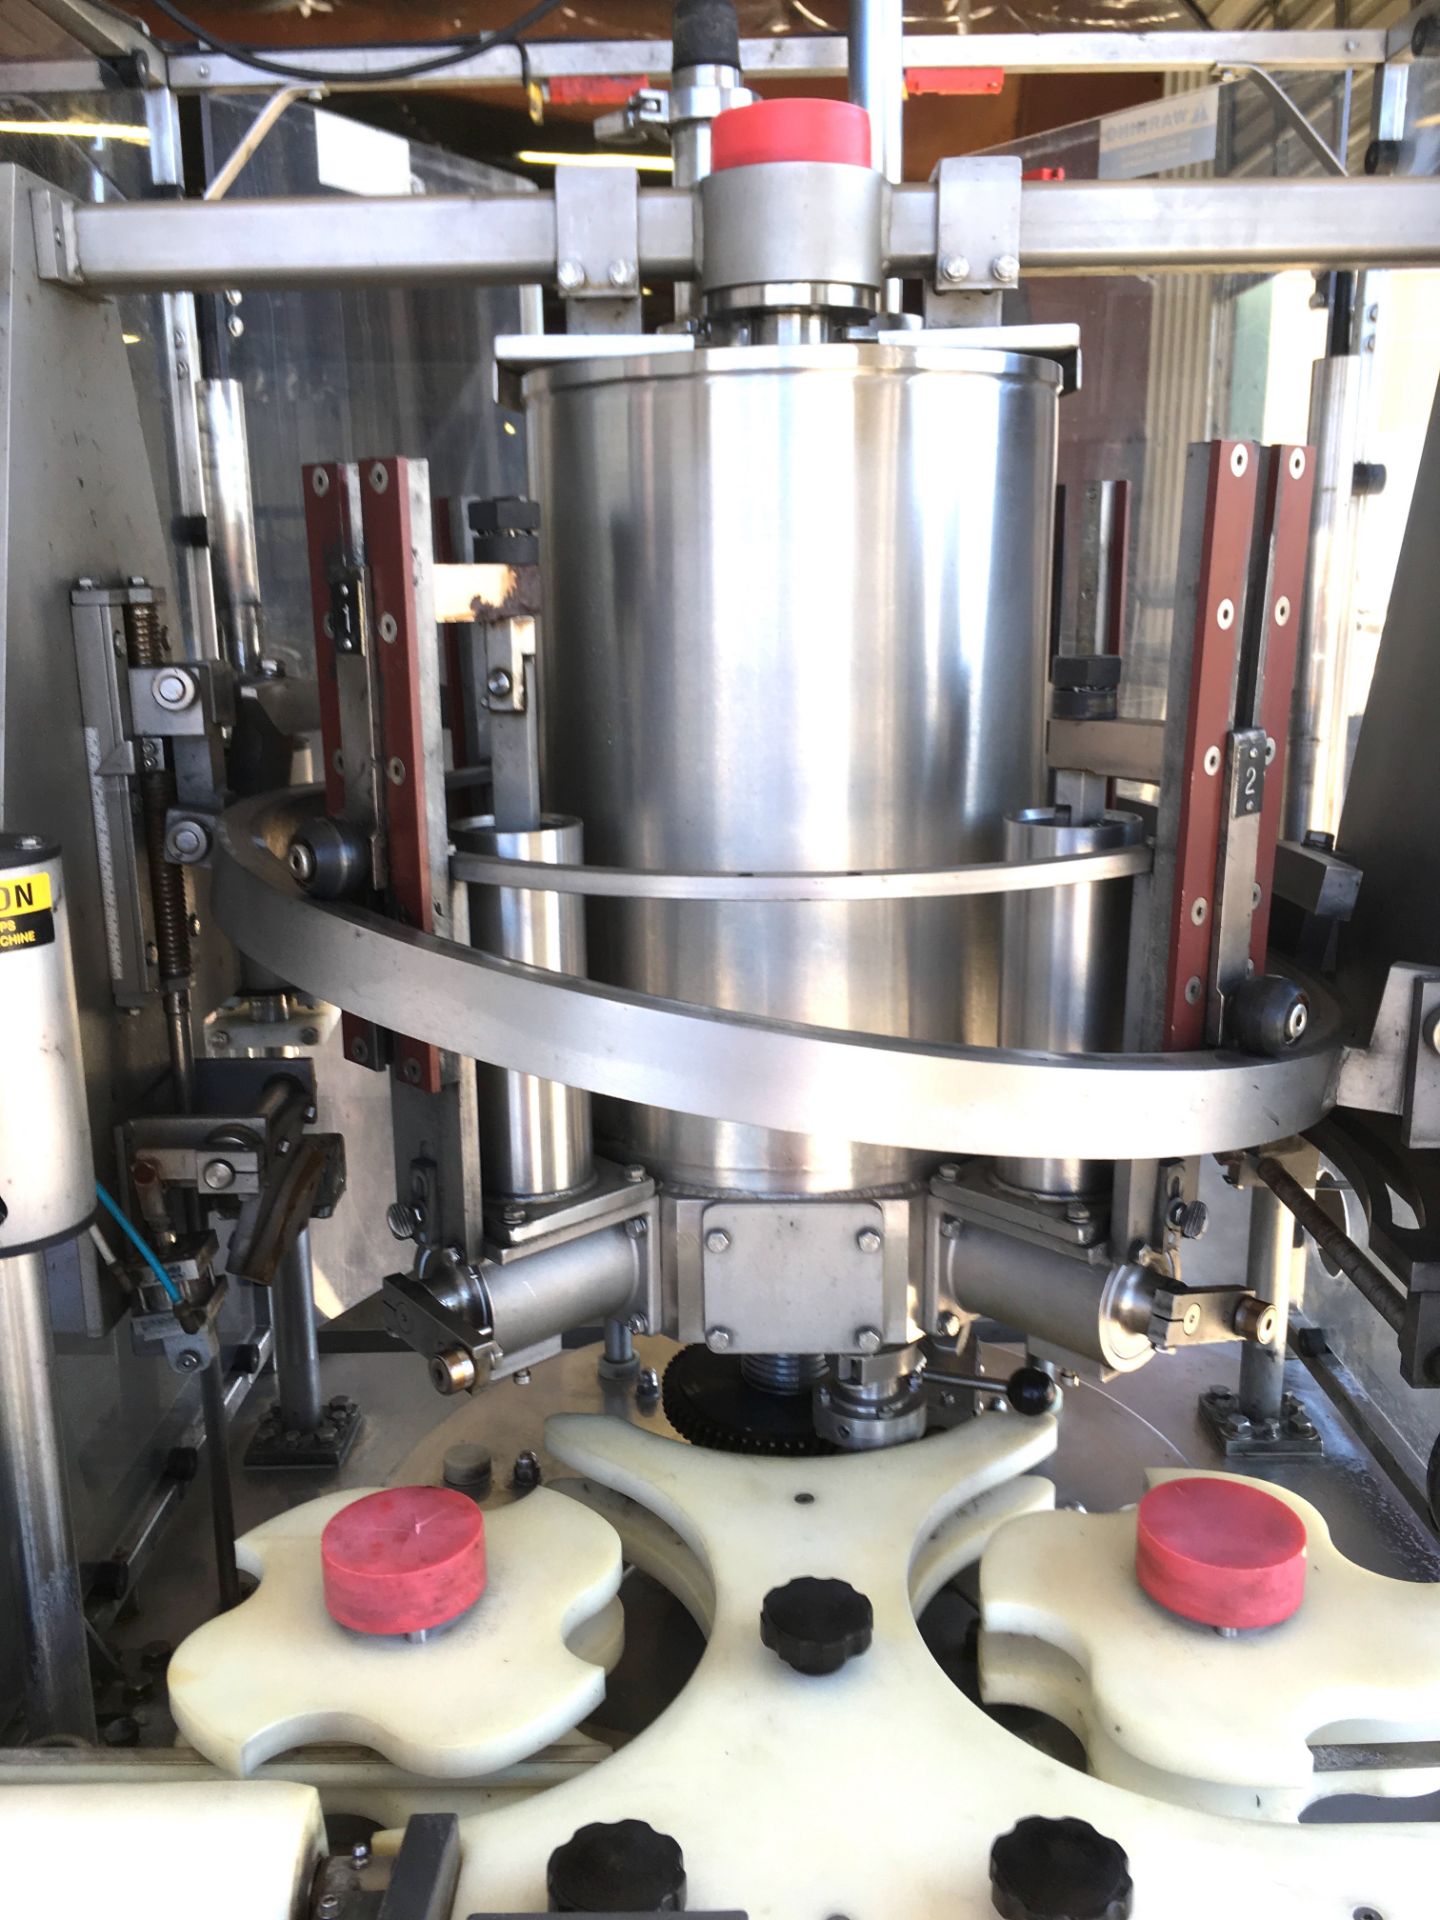 MRM 4 Head Rotary Piston Filler Serial: RPF04263, Stainless Steel Construction, Control Panel, - Image 4 of 13